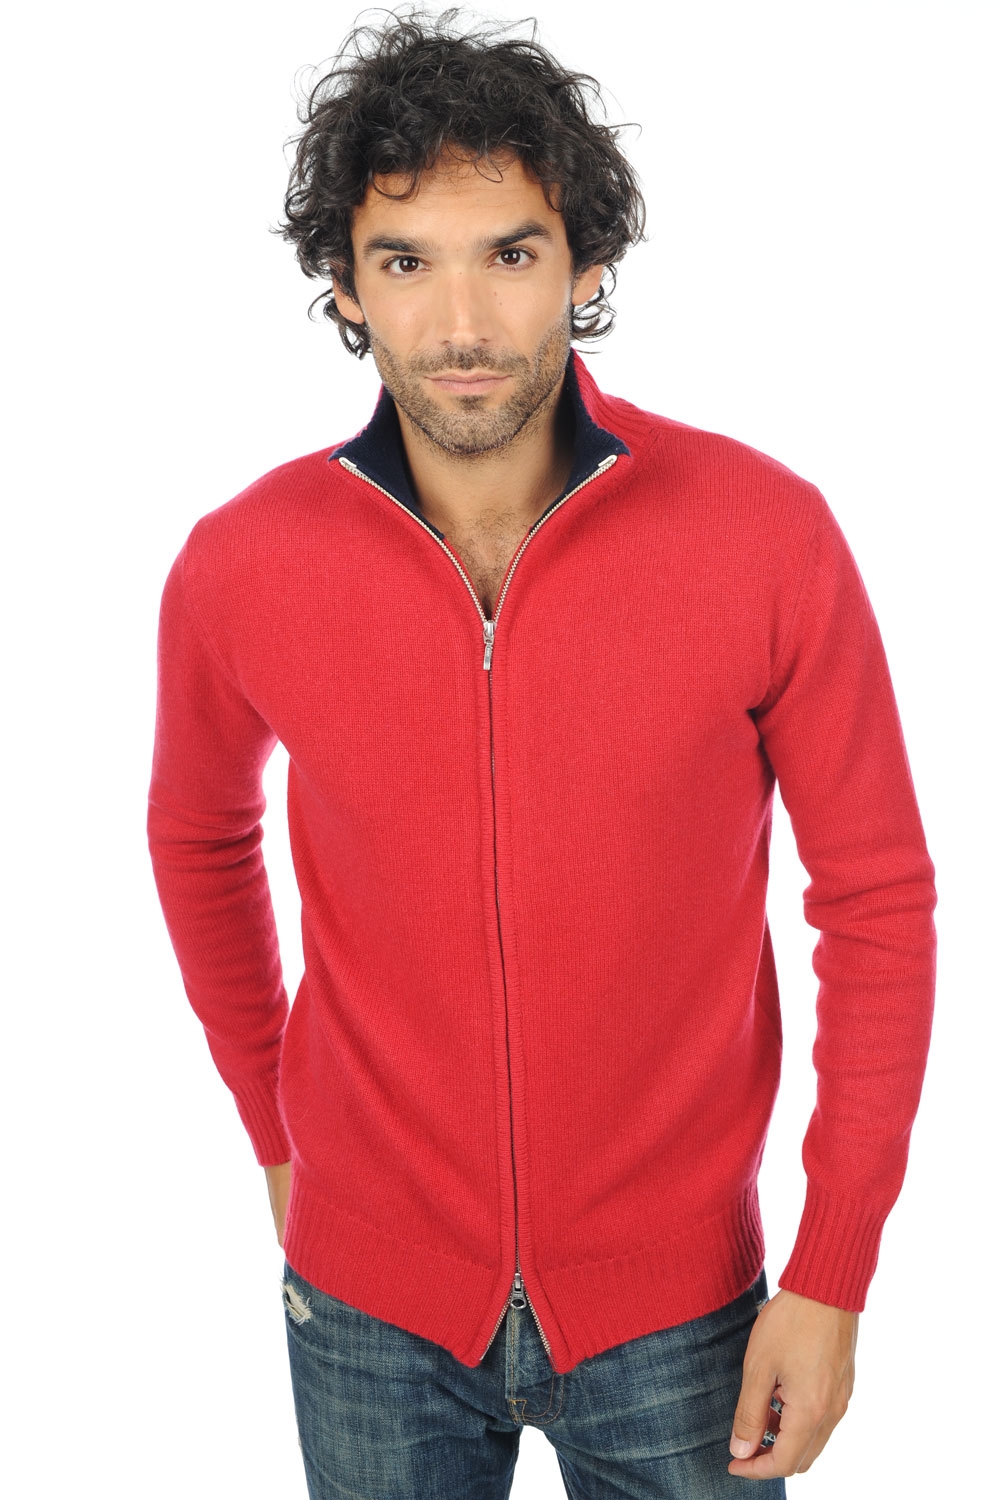 Cashmere men chunky sweater maxime blood red dress blue 2xl